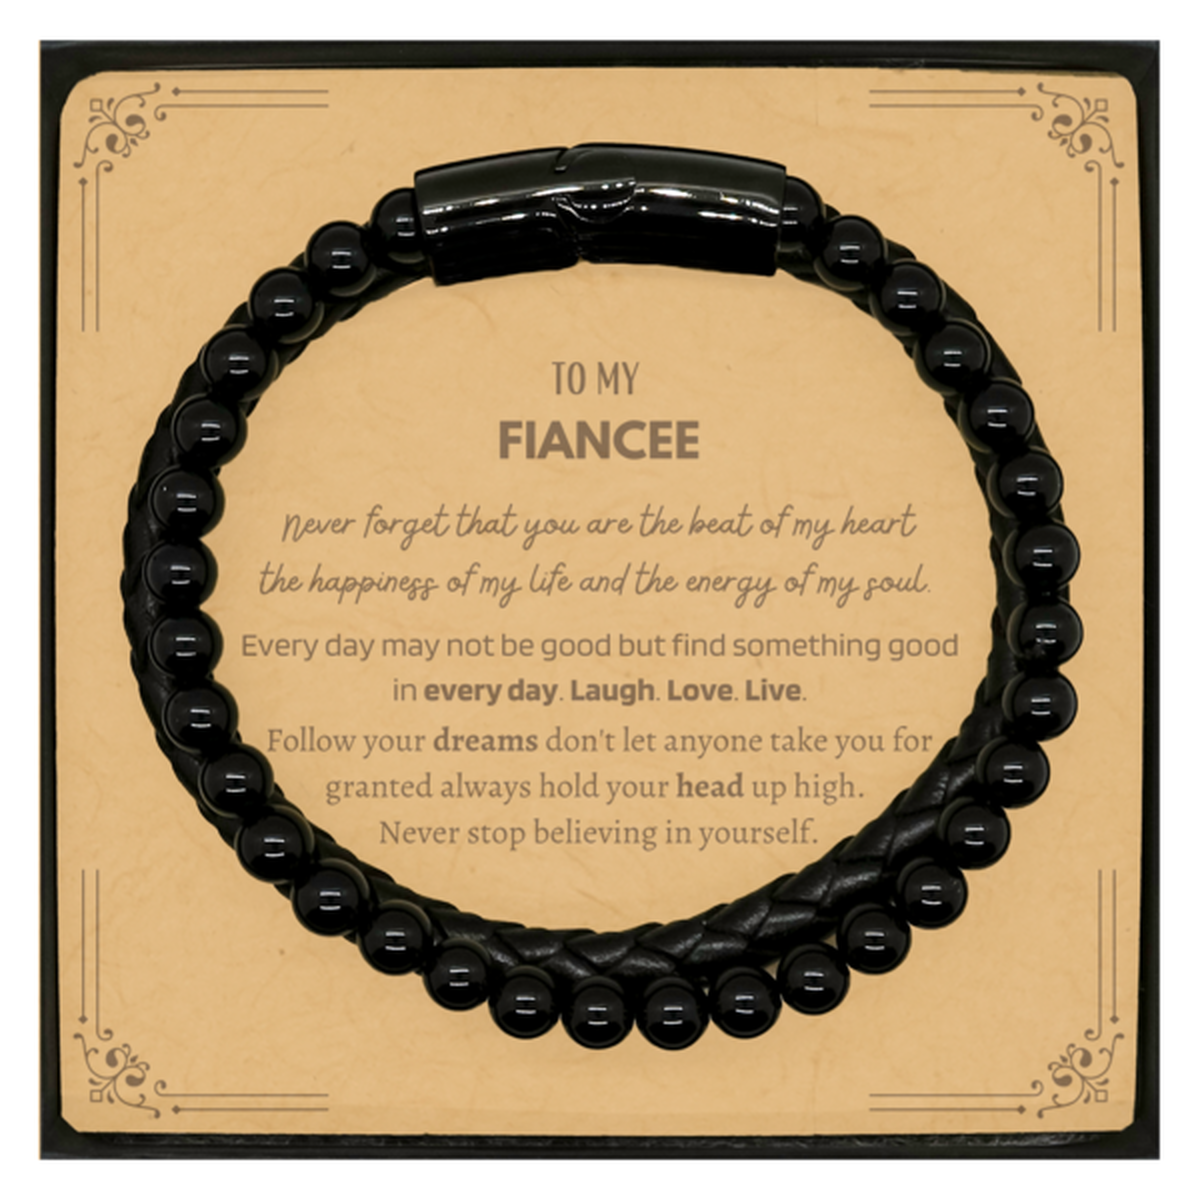 To My Fiancee Message Card Gifts, Christmas Fiancee Stone Leather Bracelets Present, Birthday Unique Motivational For Fiancee, To My Fiancee Never forget that you are the beat of my heart the happiness of my life and the energy of my soul